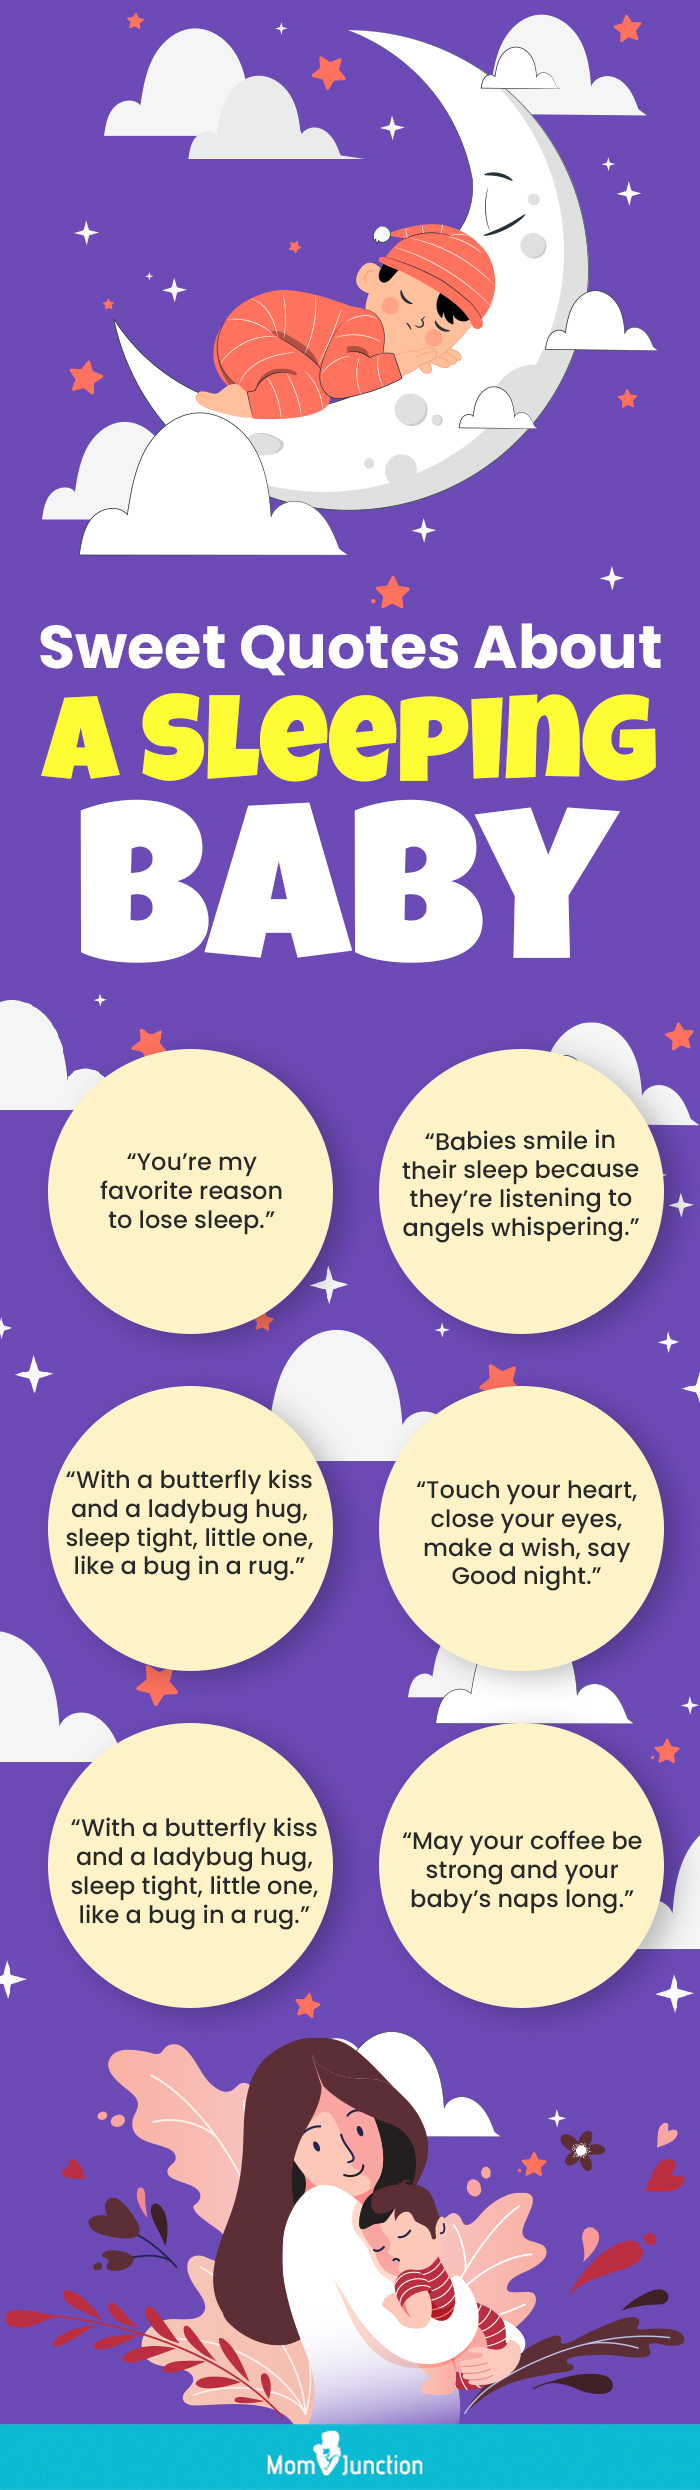 75+ Super-Cute And Funny Sleeping Baby Quotes